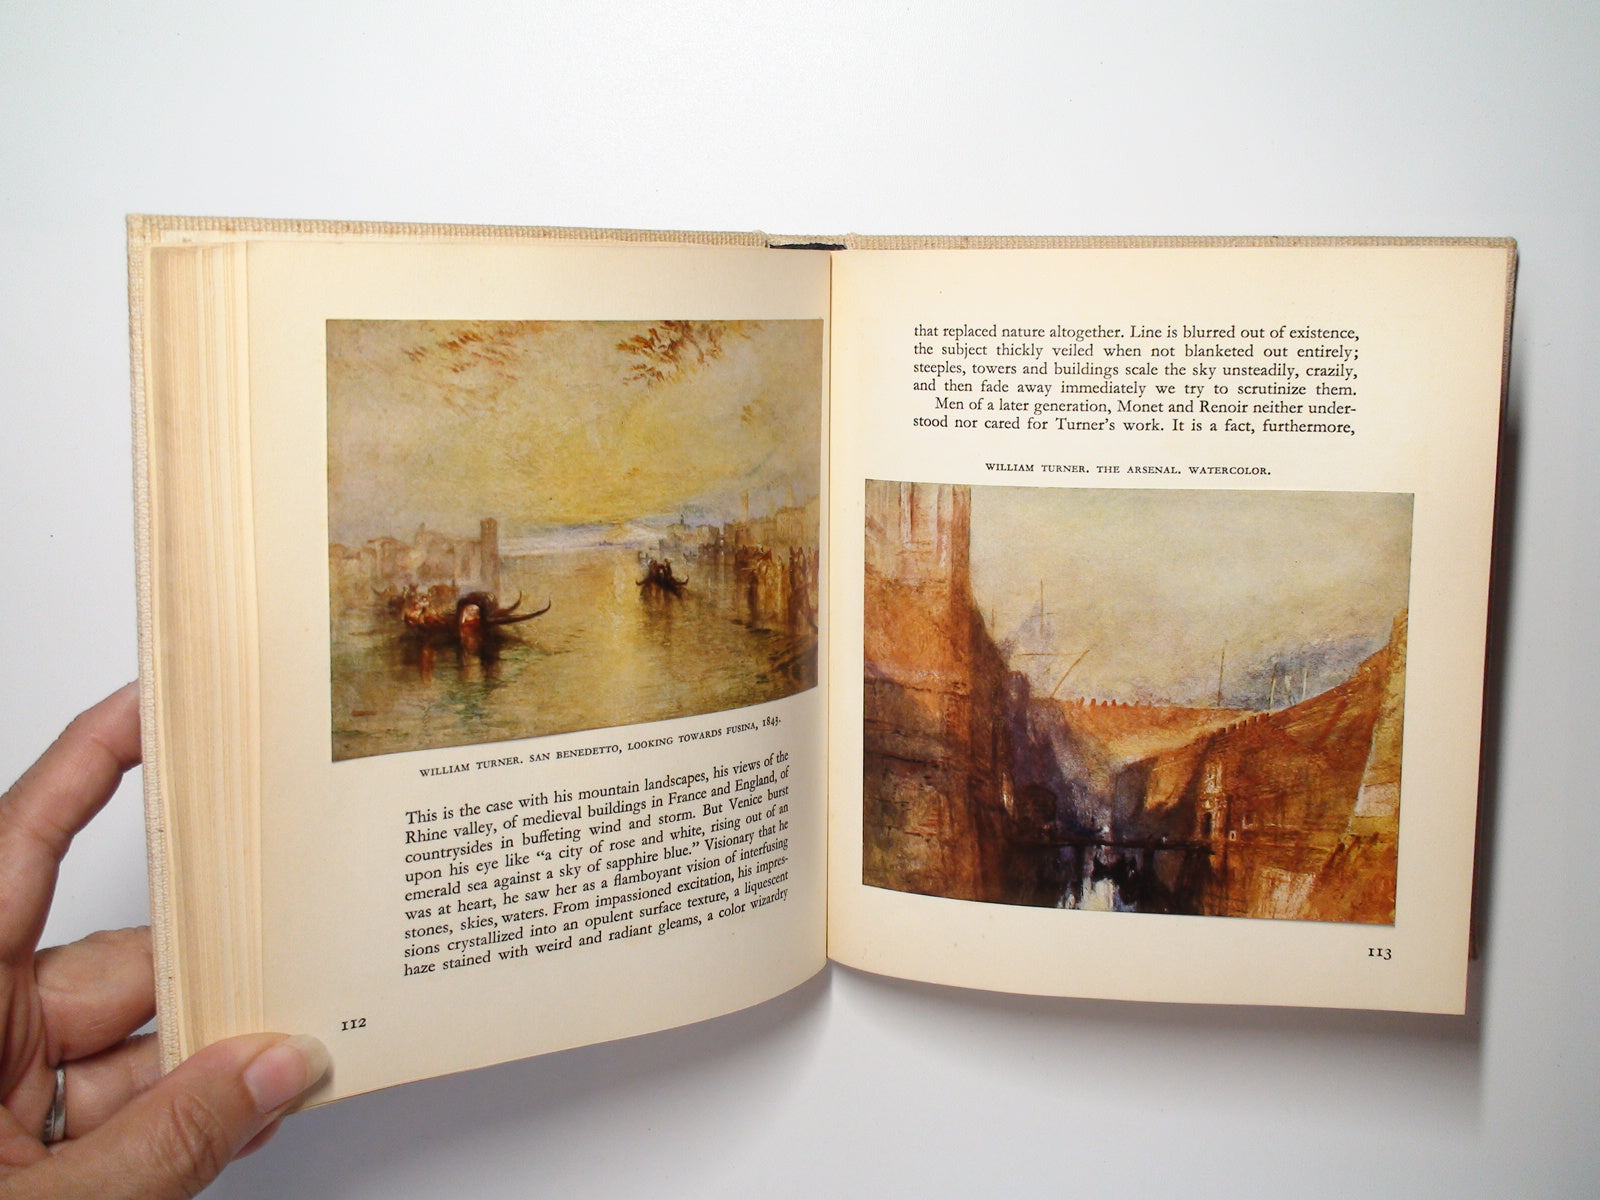 Venice, Albert Skira, Illustrated in Color, Vol 17 of Taste of Our Time, 1956